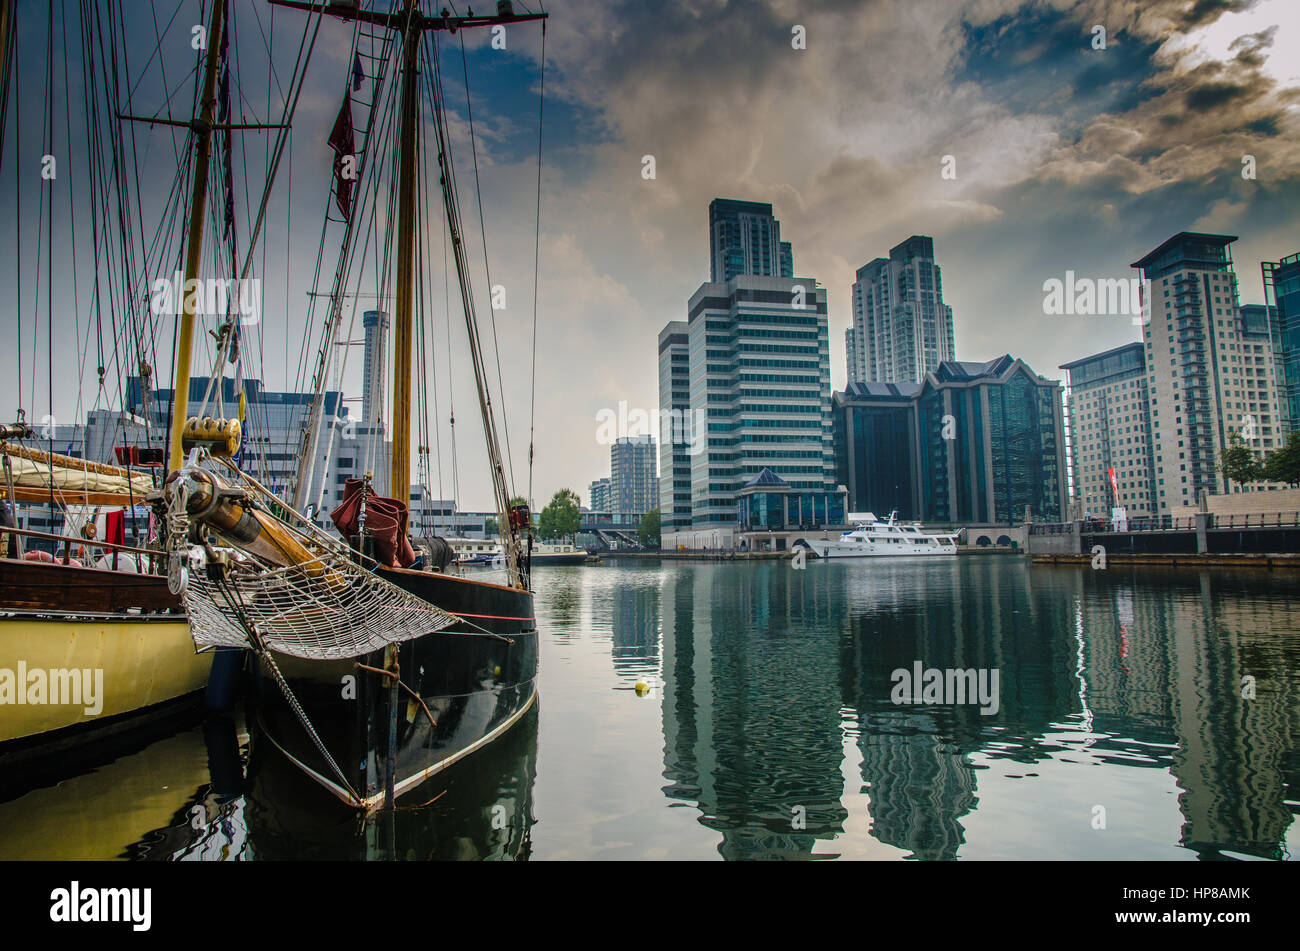 Boats, office buildings and luxury living at London Docklands under a dramatic sky Stock Photo